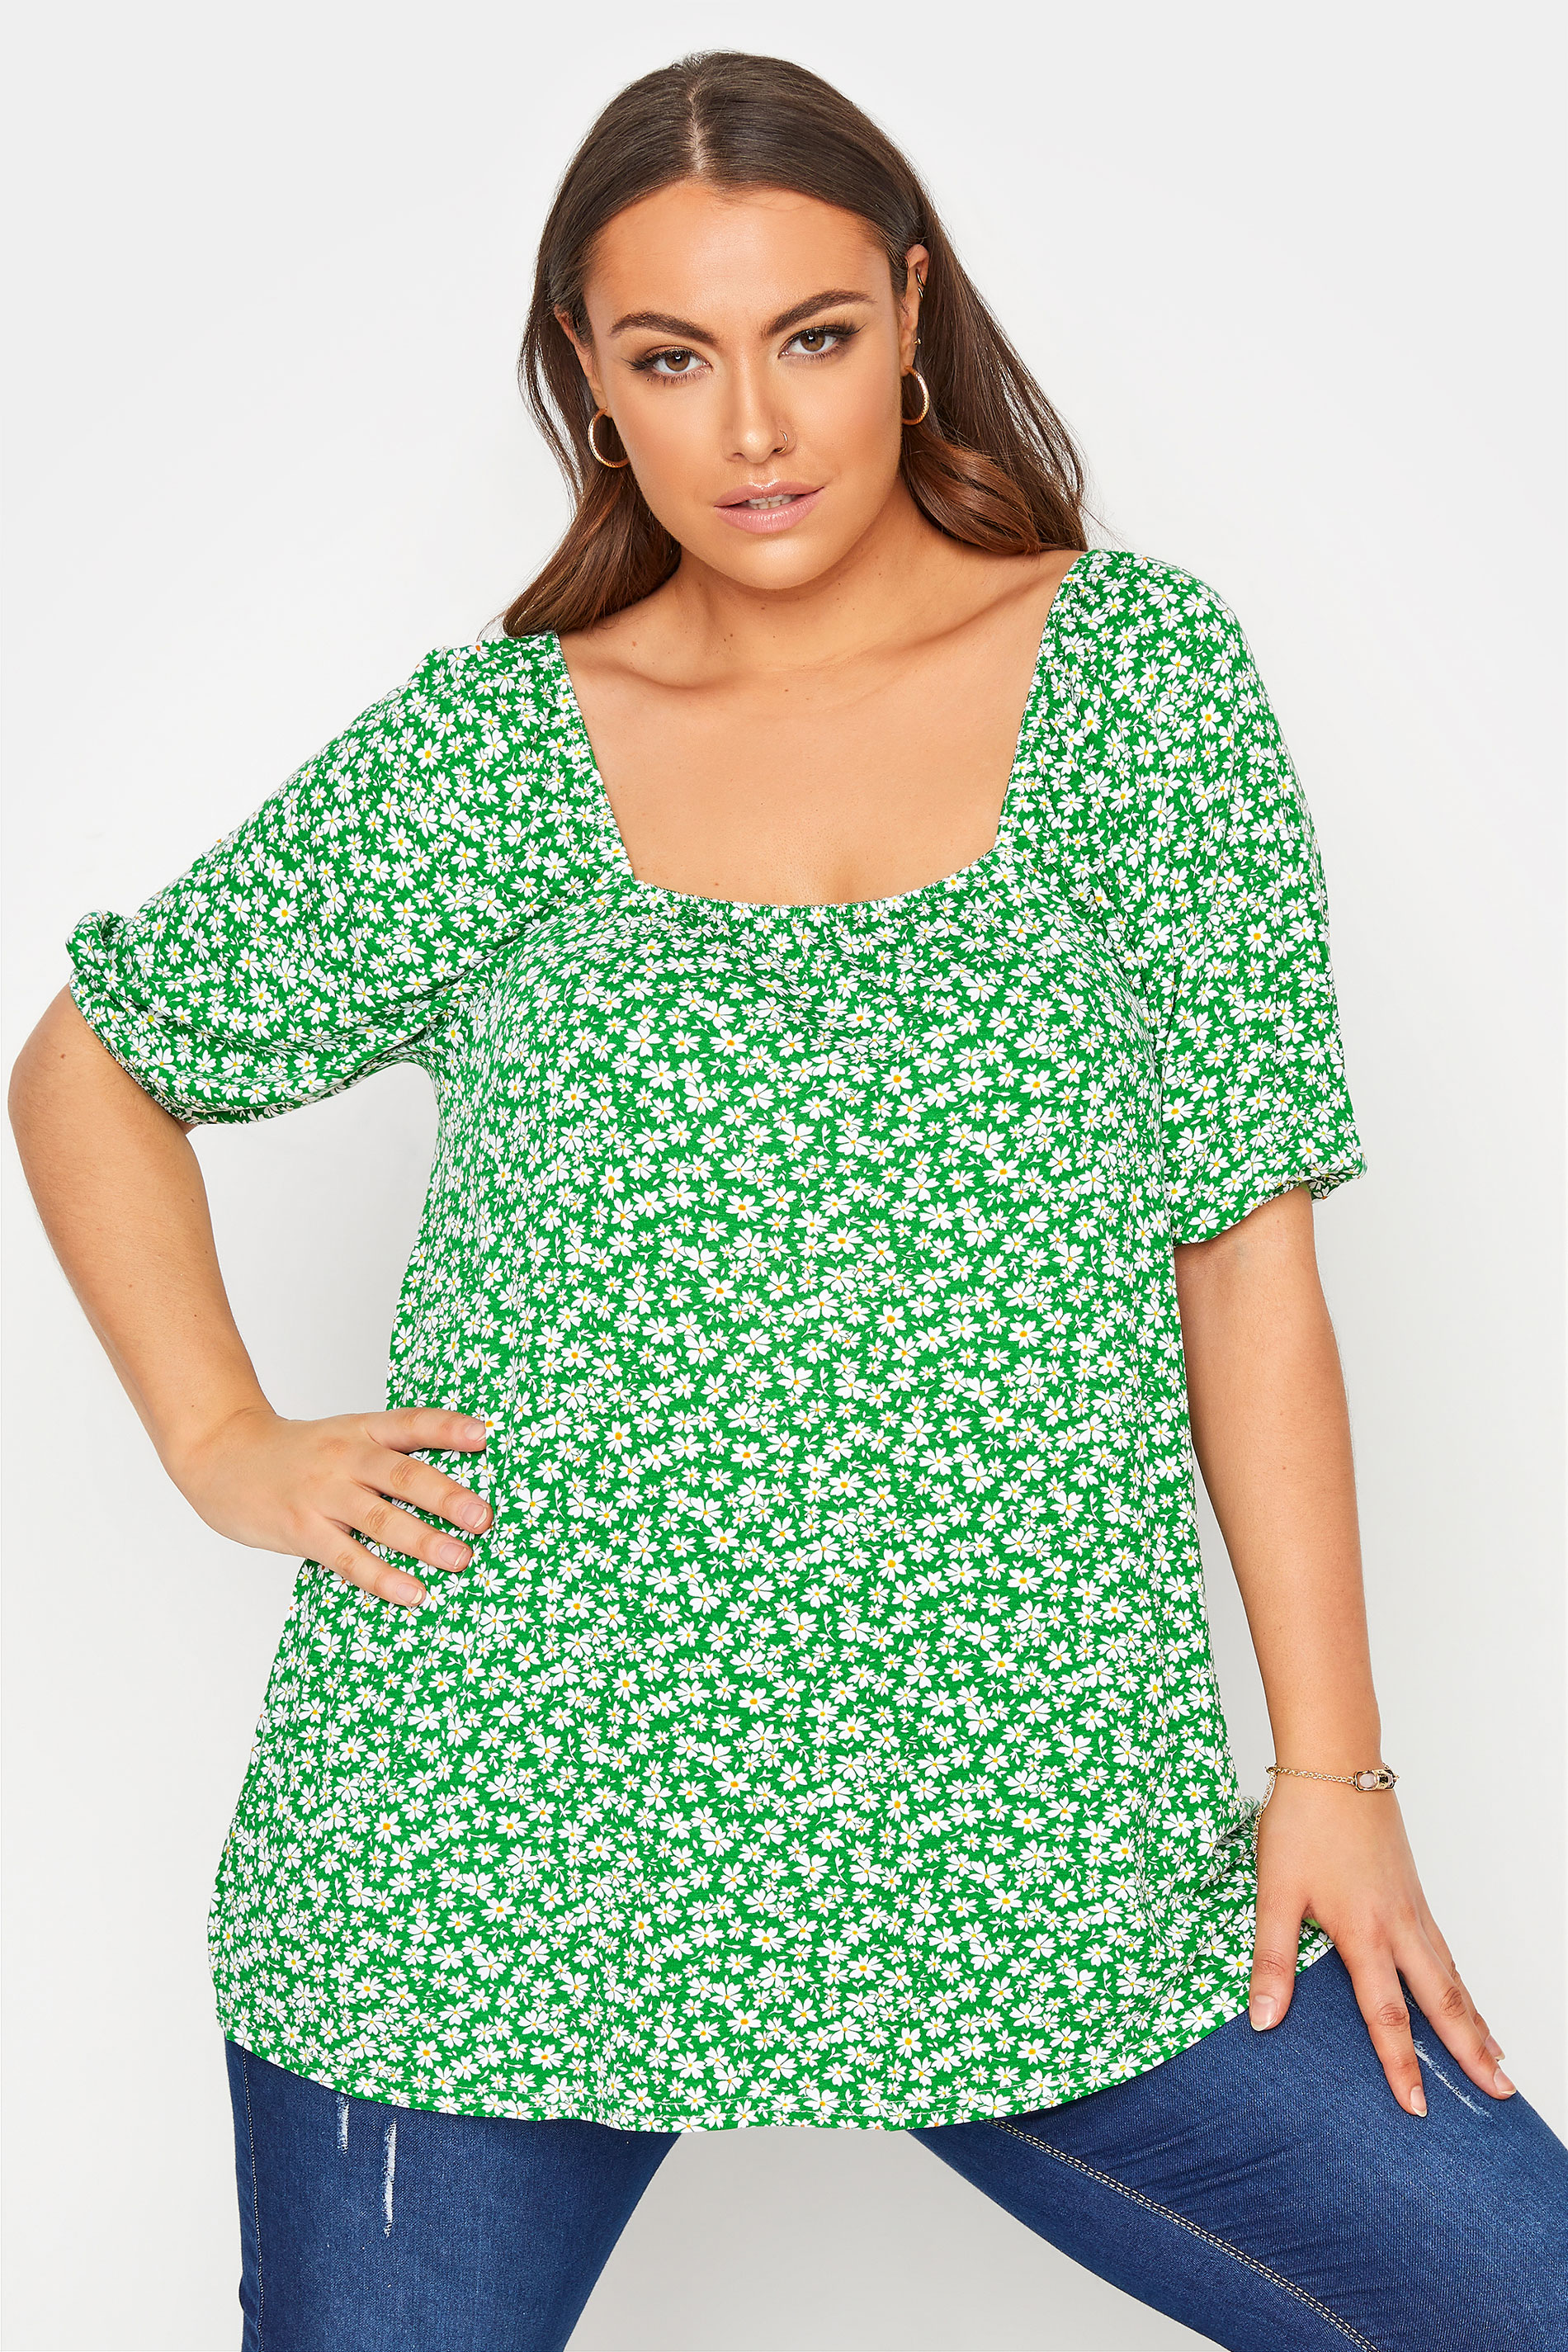 LIMITED COLLECTION Curve Bright Green Daisy Print Square Neck Top_A.jpg